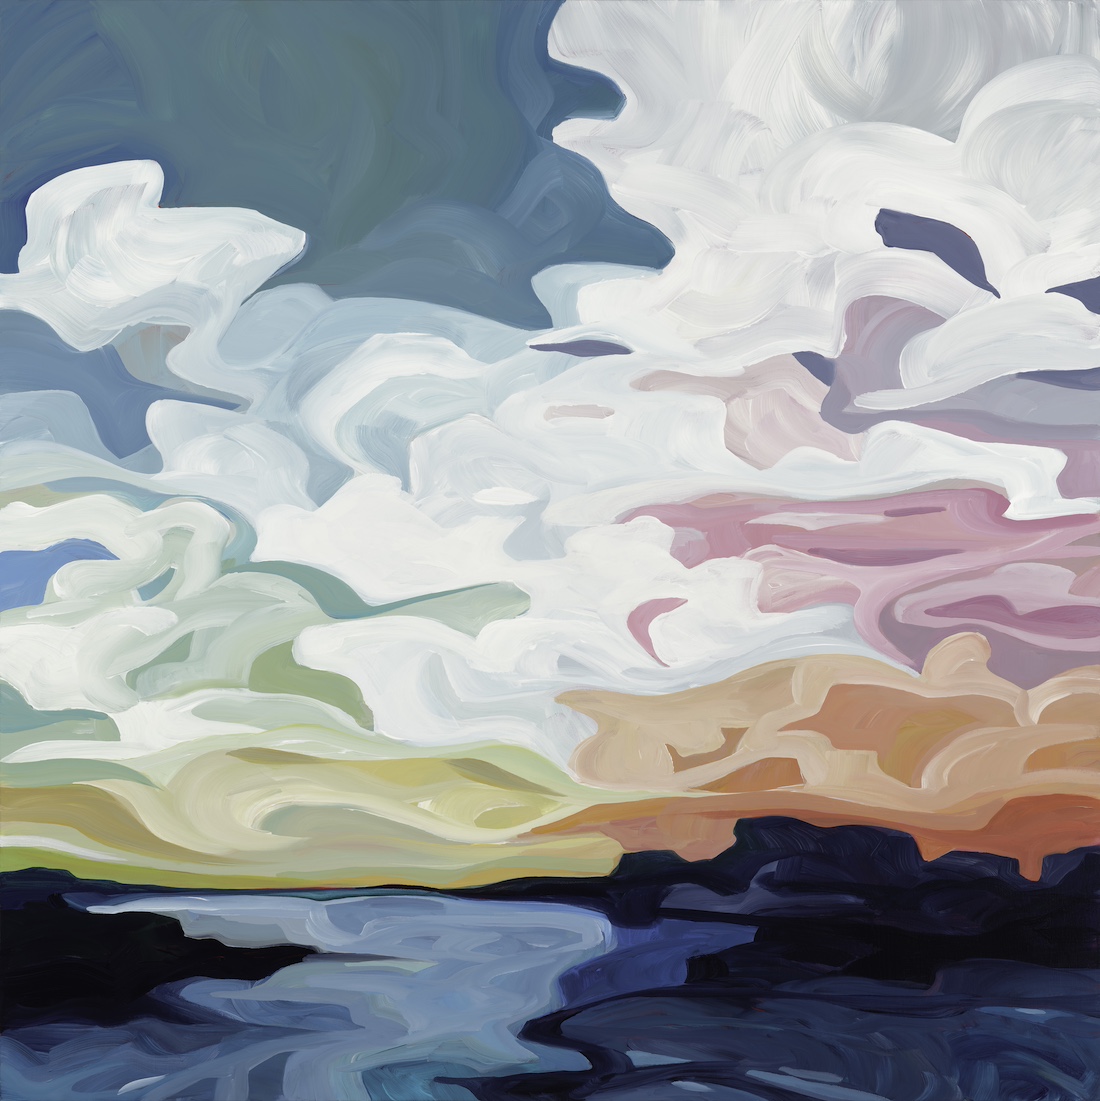 Colourful cloudy sky art called Evening over Evermore from Susannah Bee Art